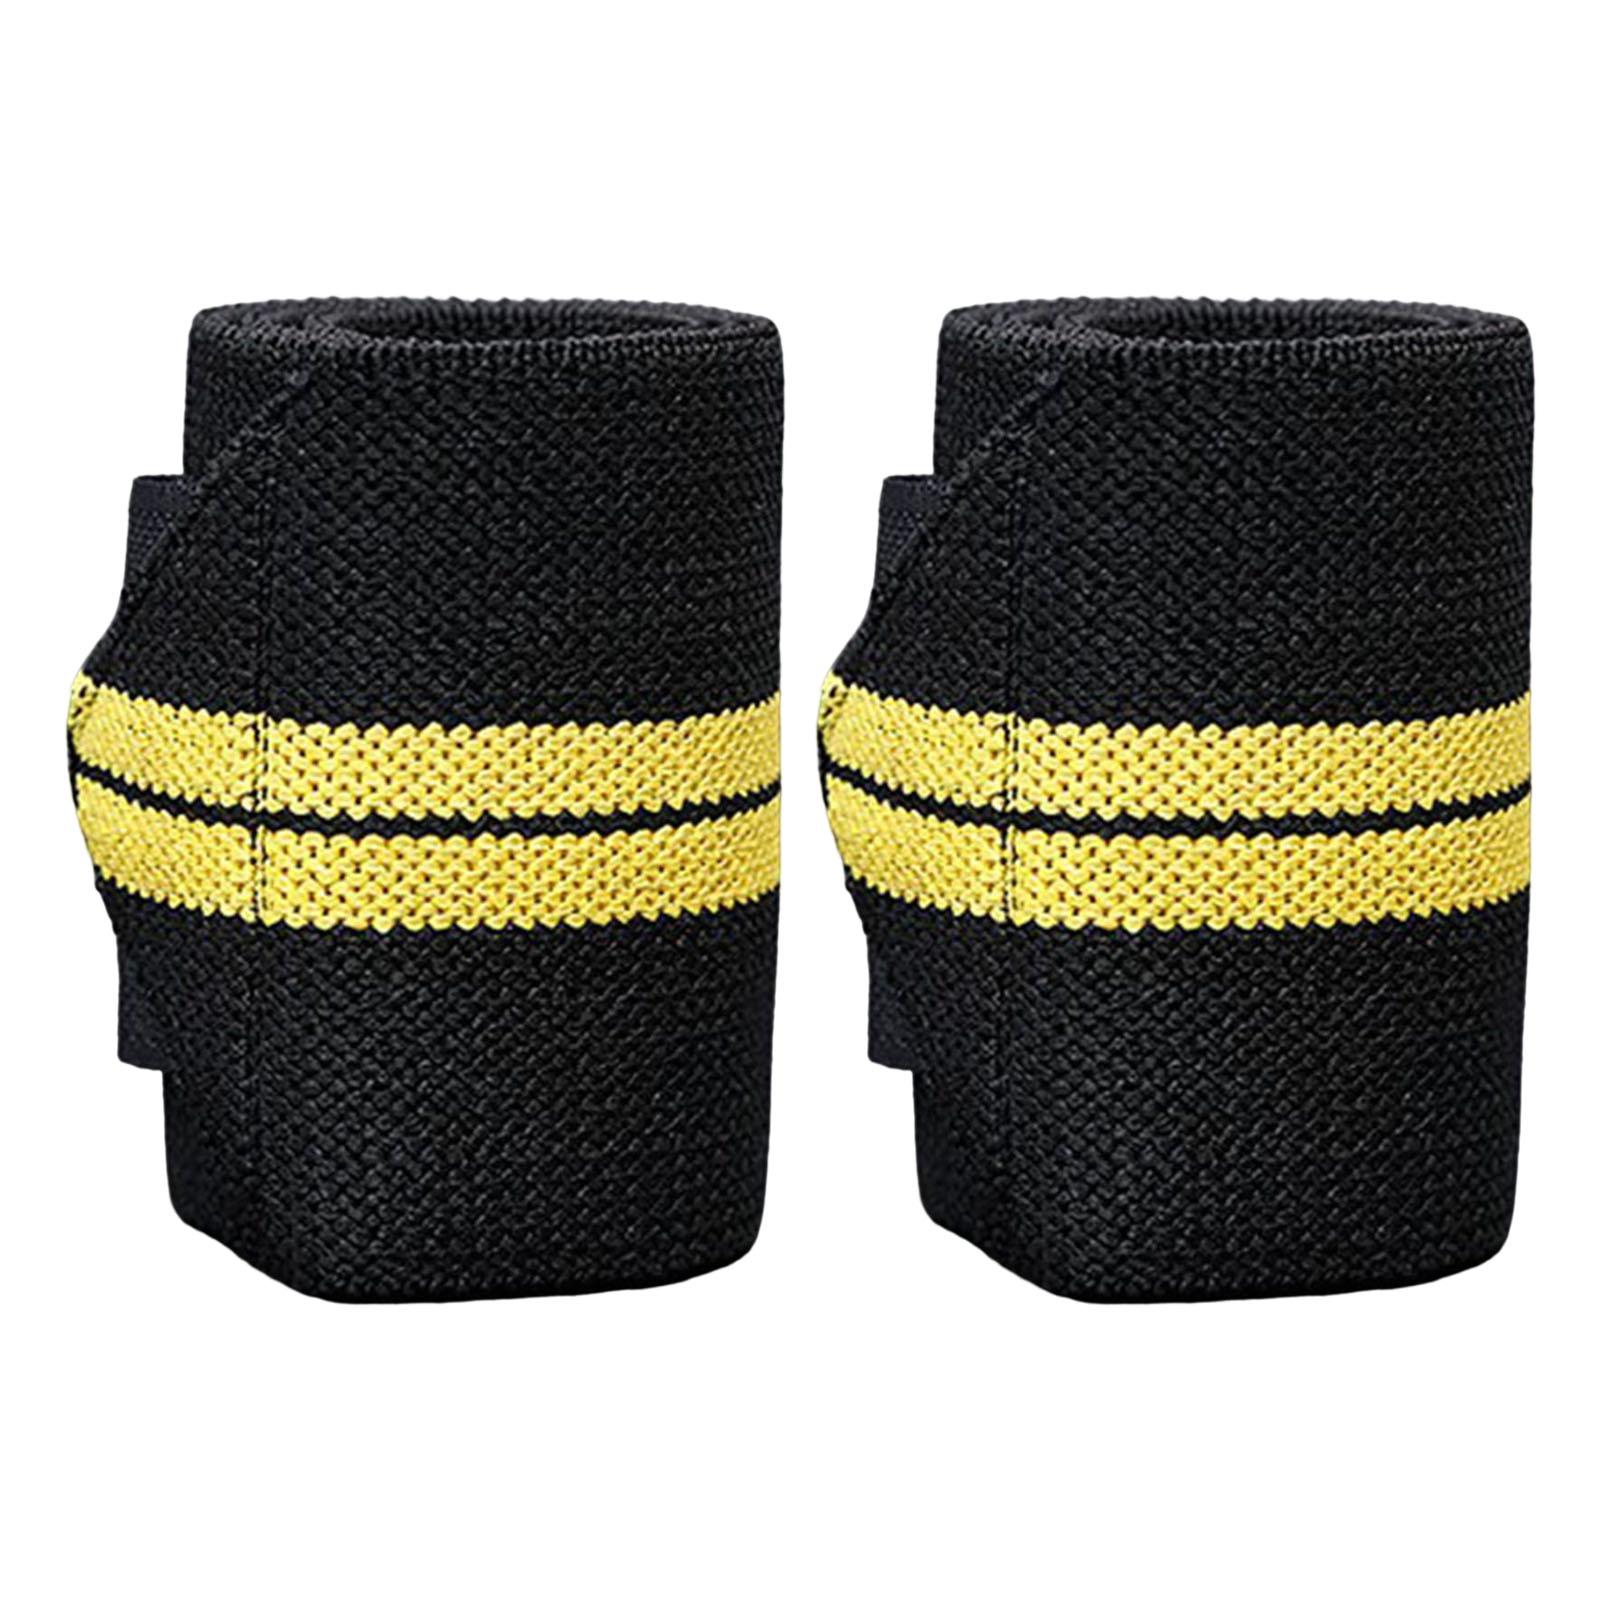 Breathable Wrist Brace Wrist Compression Strap Support for Working Out Yellow